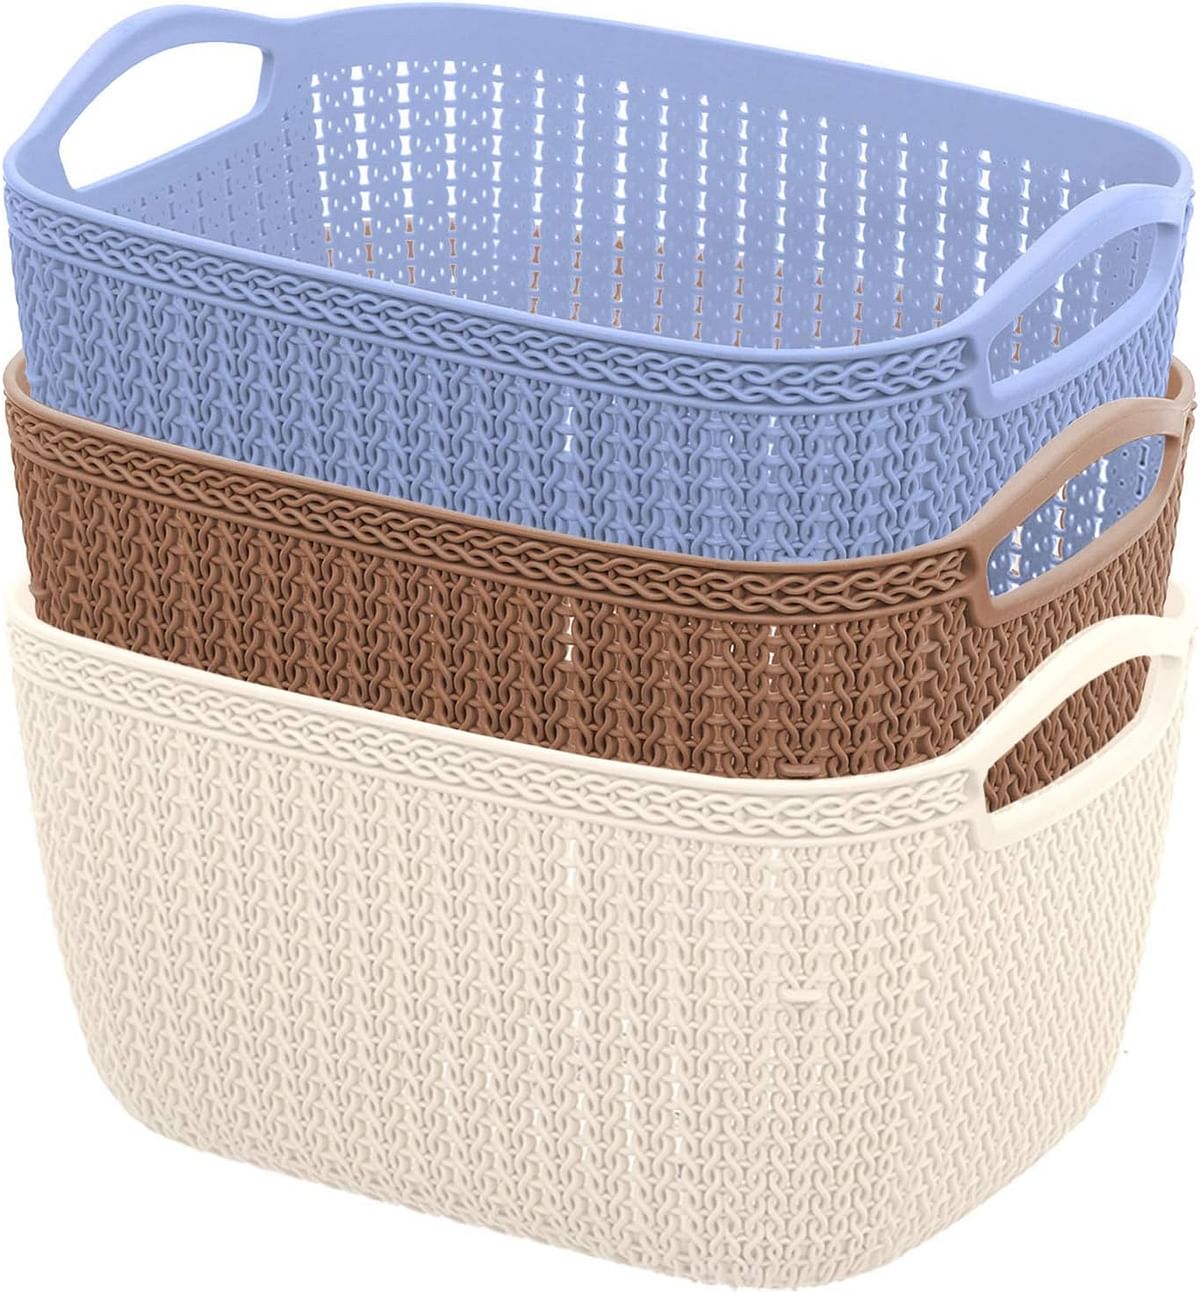 Heart Home Unbreakable Plastic 3 Pieces Multipurpose Medium Size Flexible Storage Baskets/Fruit Vegetable Bathroom Stationary Home Basket with Handles CTHH018472 Brown & Cream & Grey